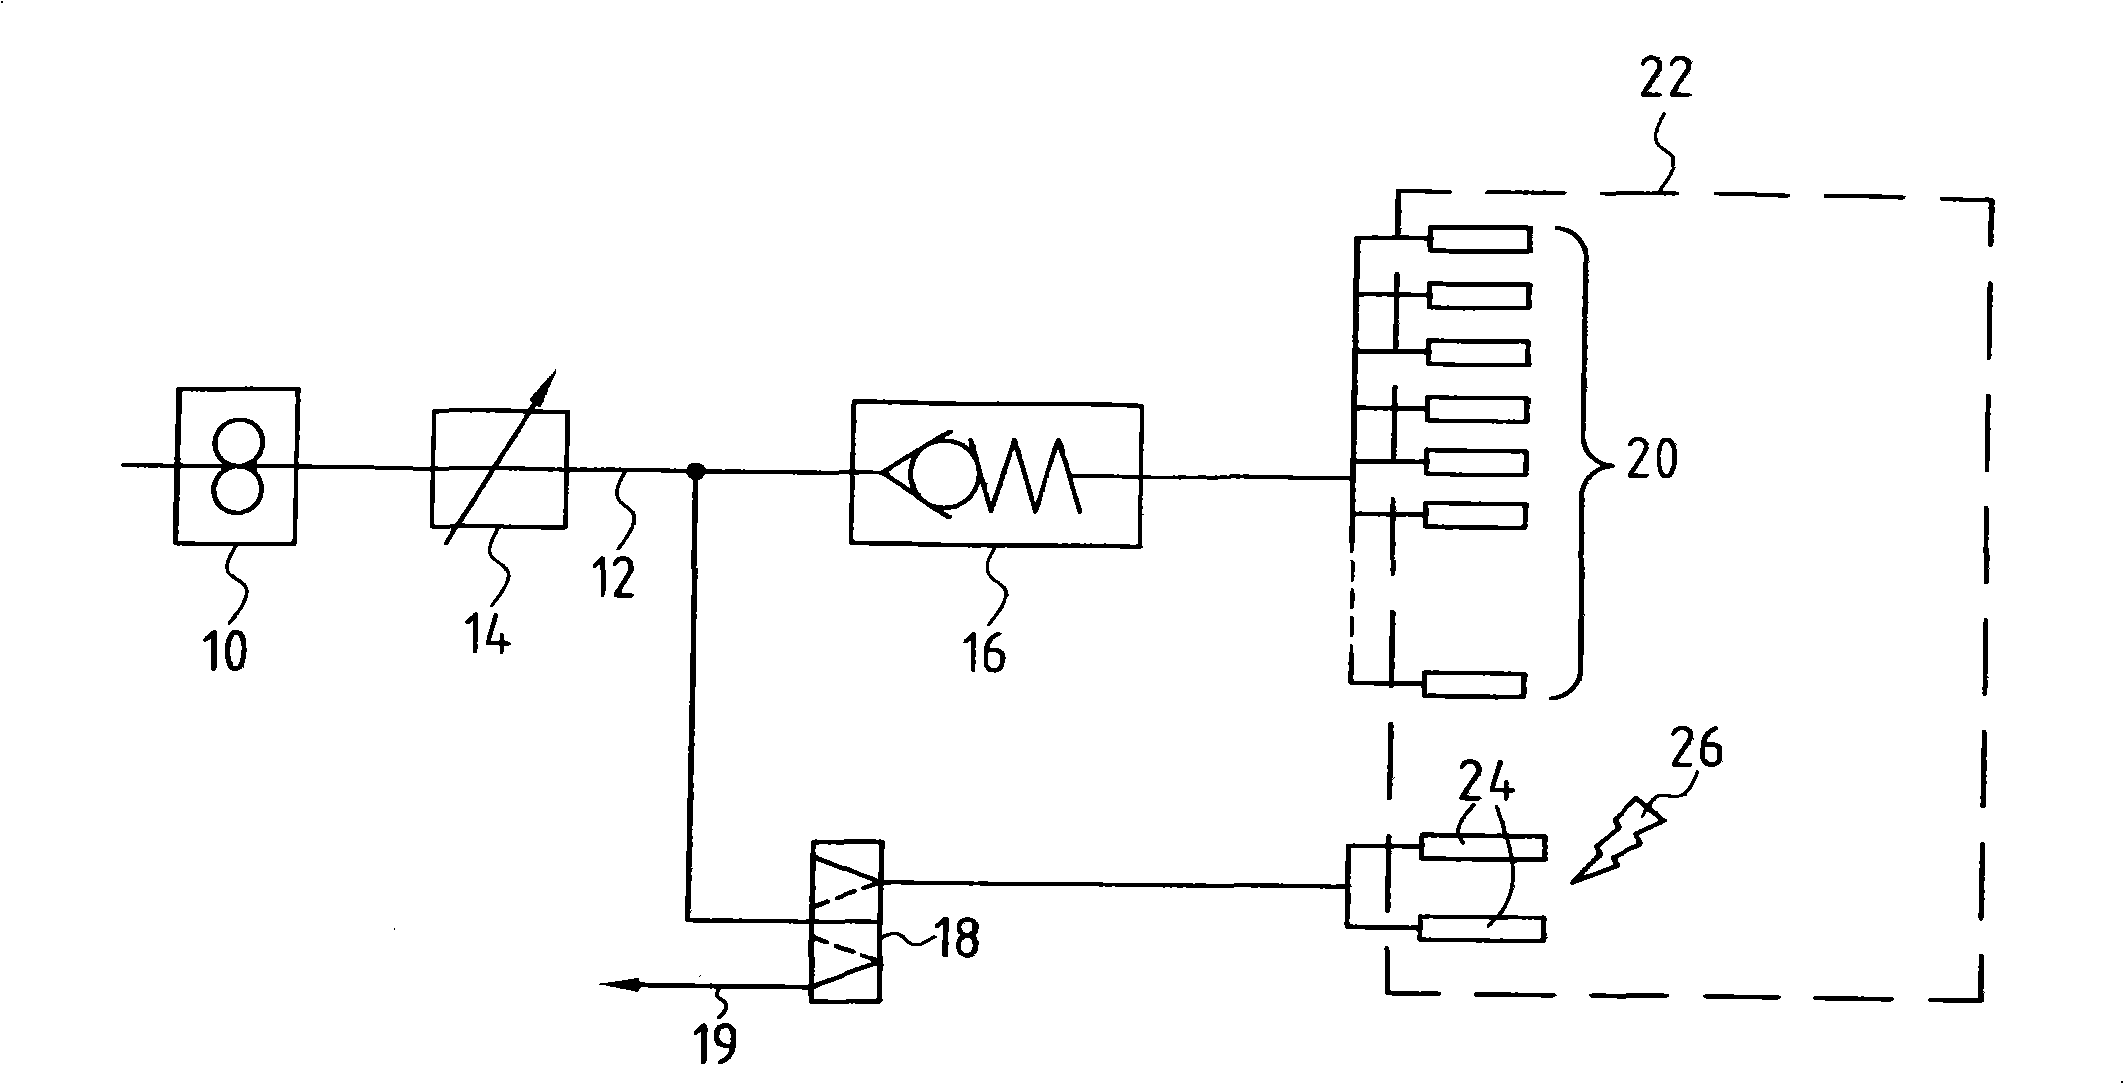 Method of starting a gas turbine helicopter engine, a fuel feed circuit for such an engine, and an engine having such a circuit